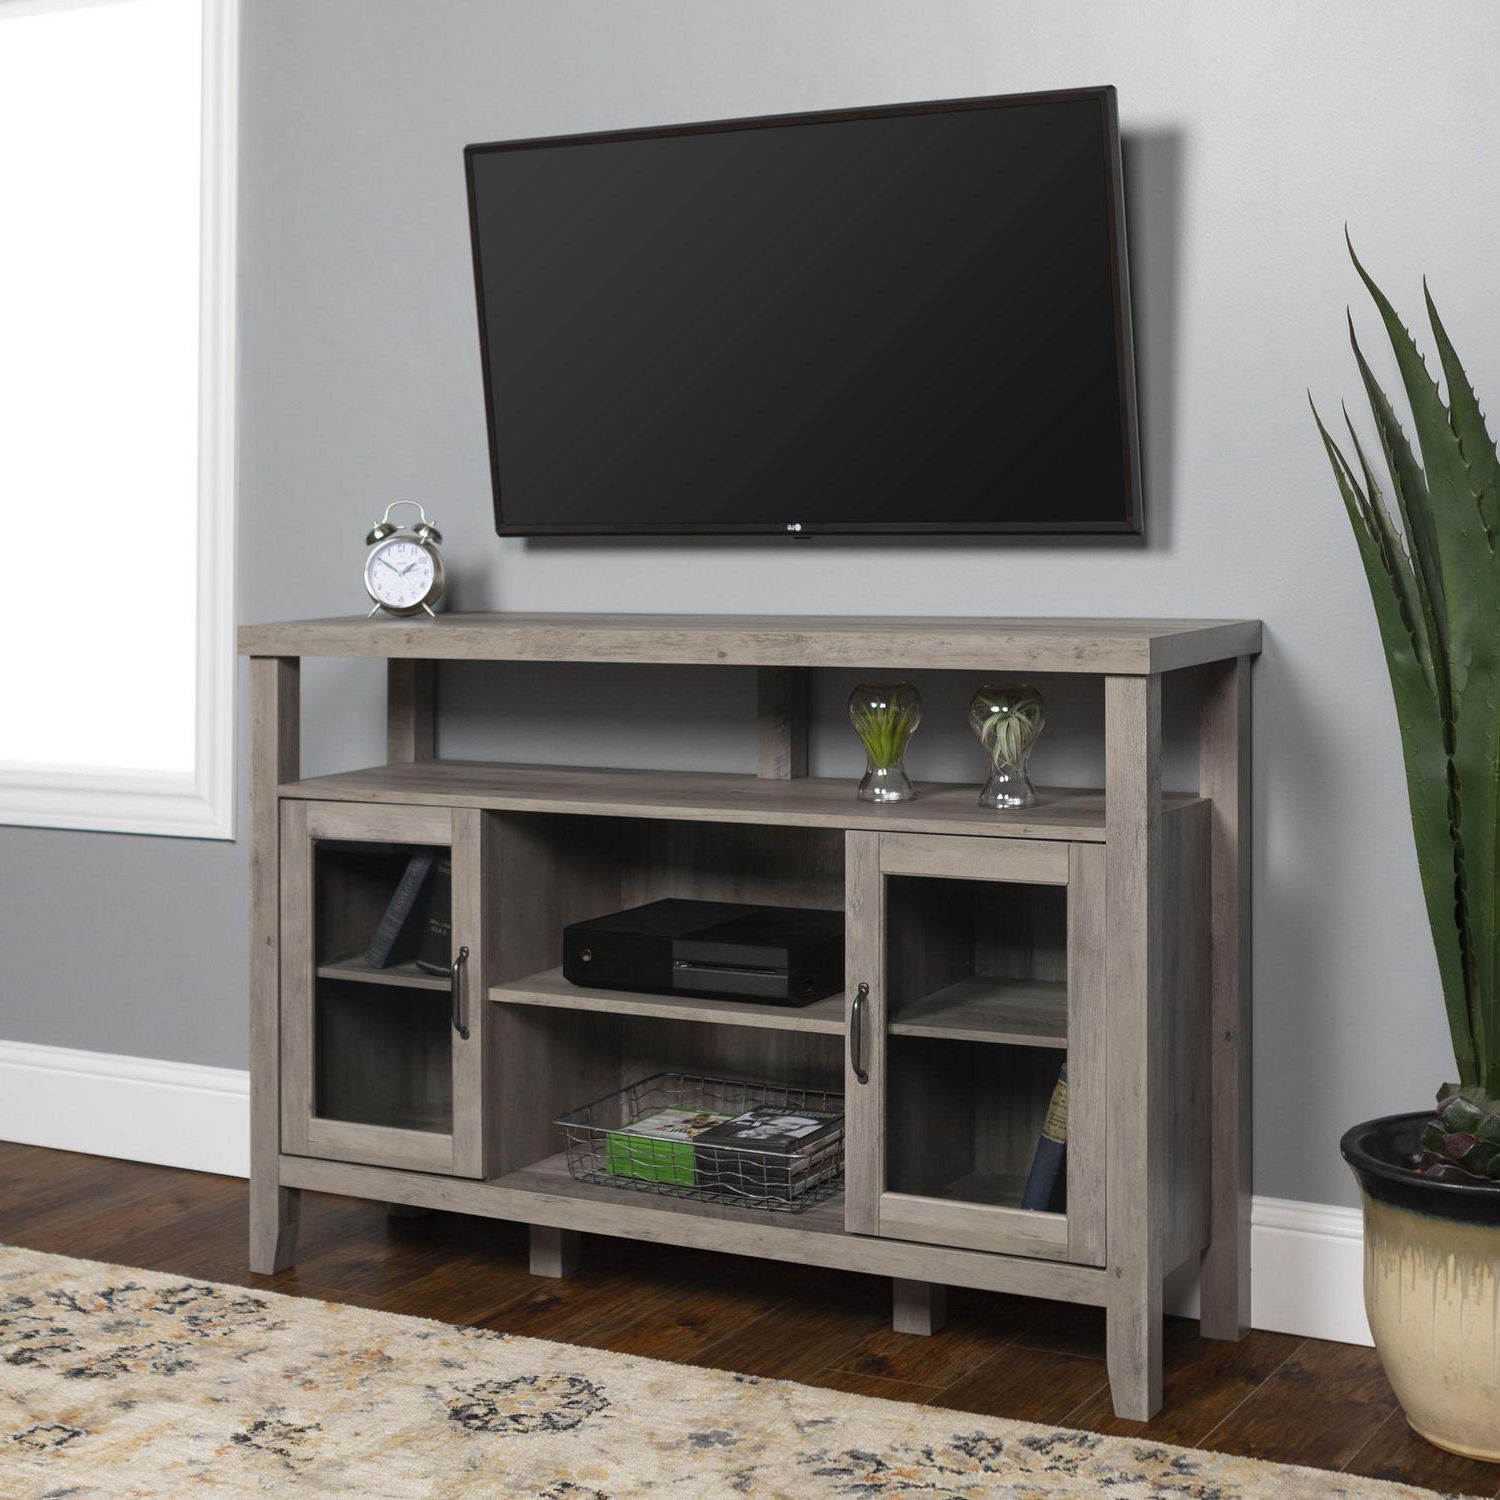 Manor Park Rustic Farmhouse Tv Stand For Tv's Up To 56" – Multiple With Regard To Most Recently Released Modern Farmhouse Rustic Tv Stands (View 15 of 15)